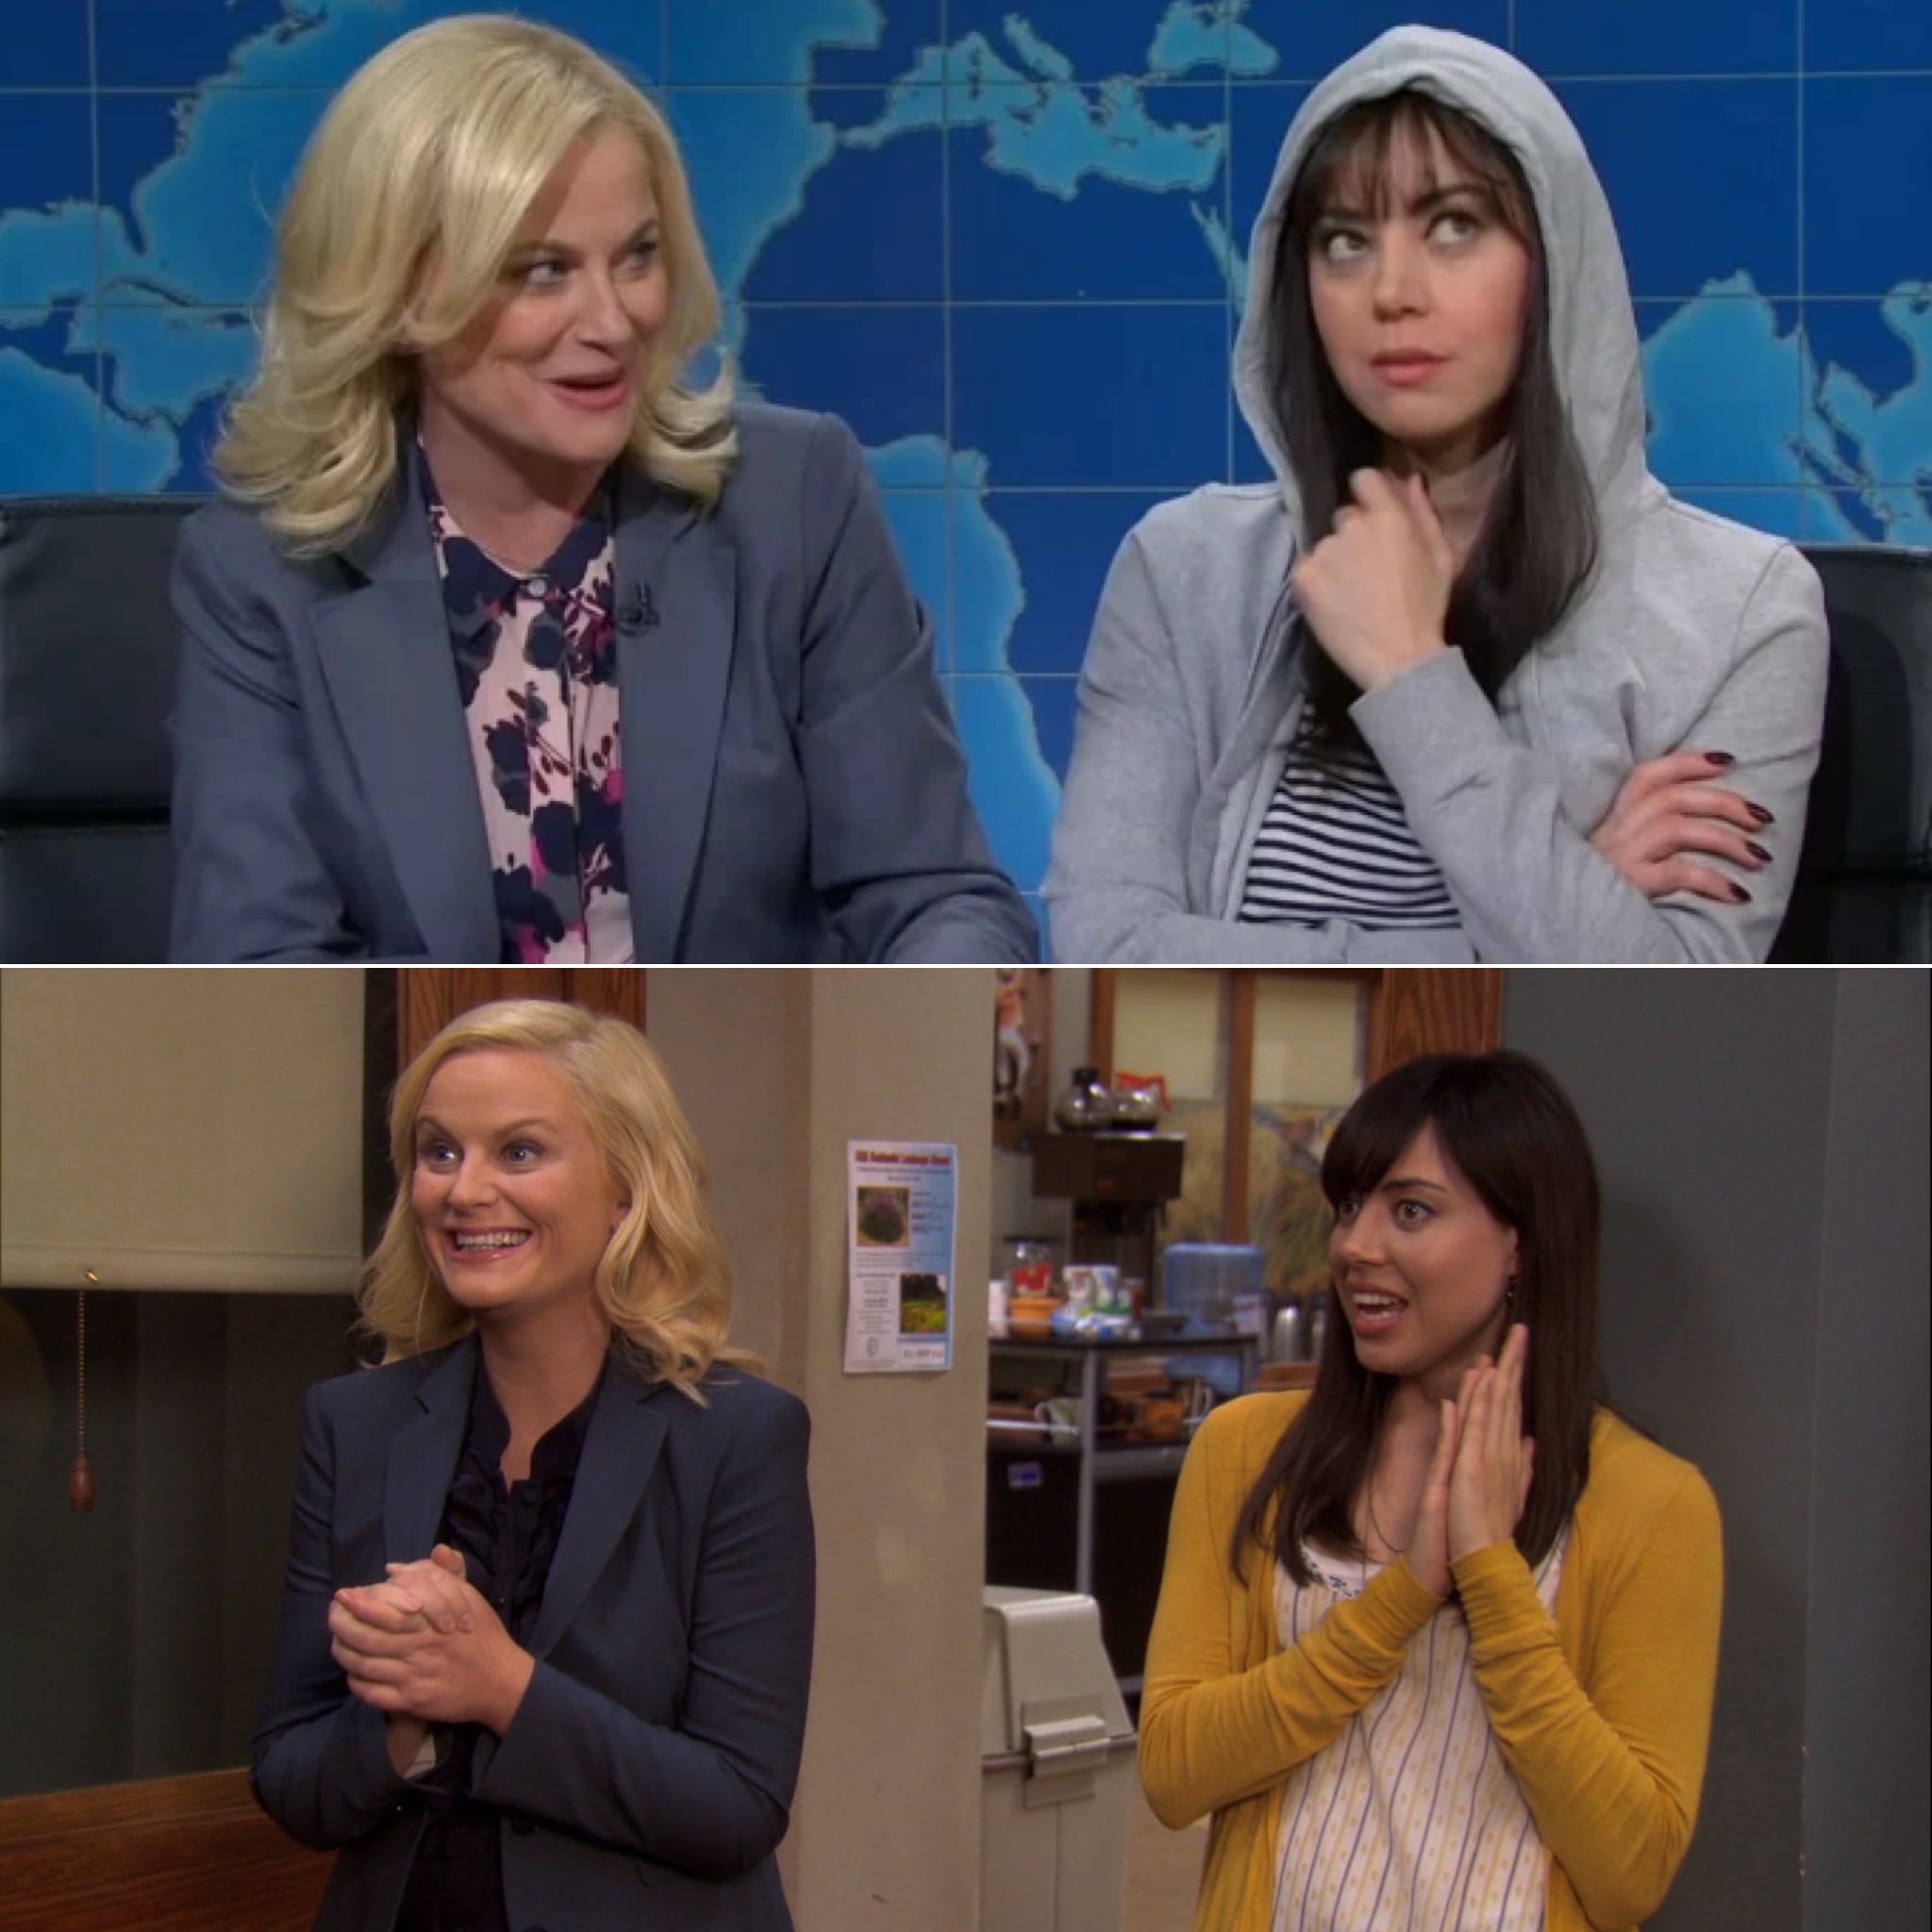 Amy Poehler and Aubrey Plaza reprise ' Parks and Rec' roles on 'SNL